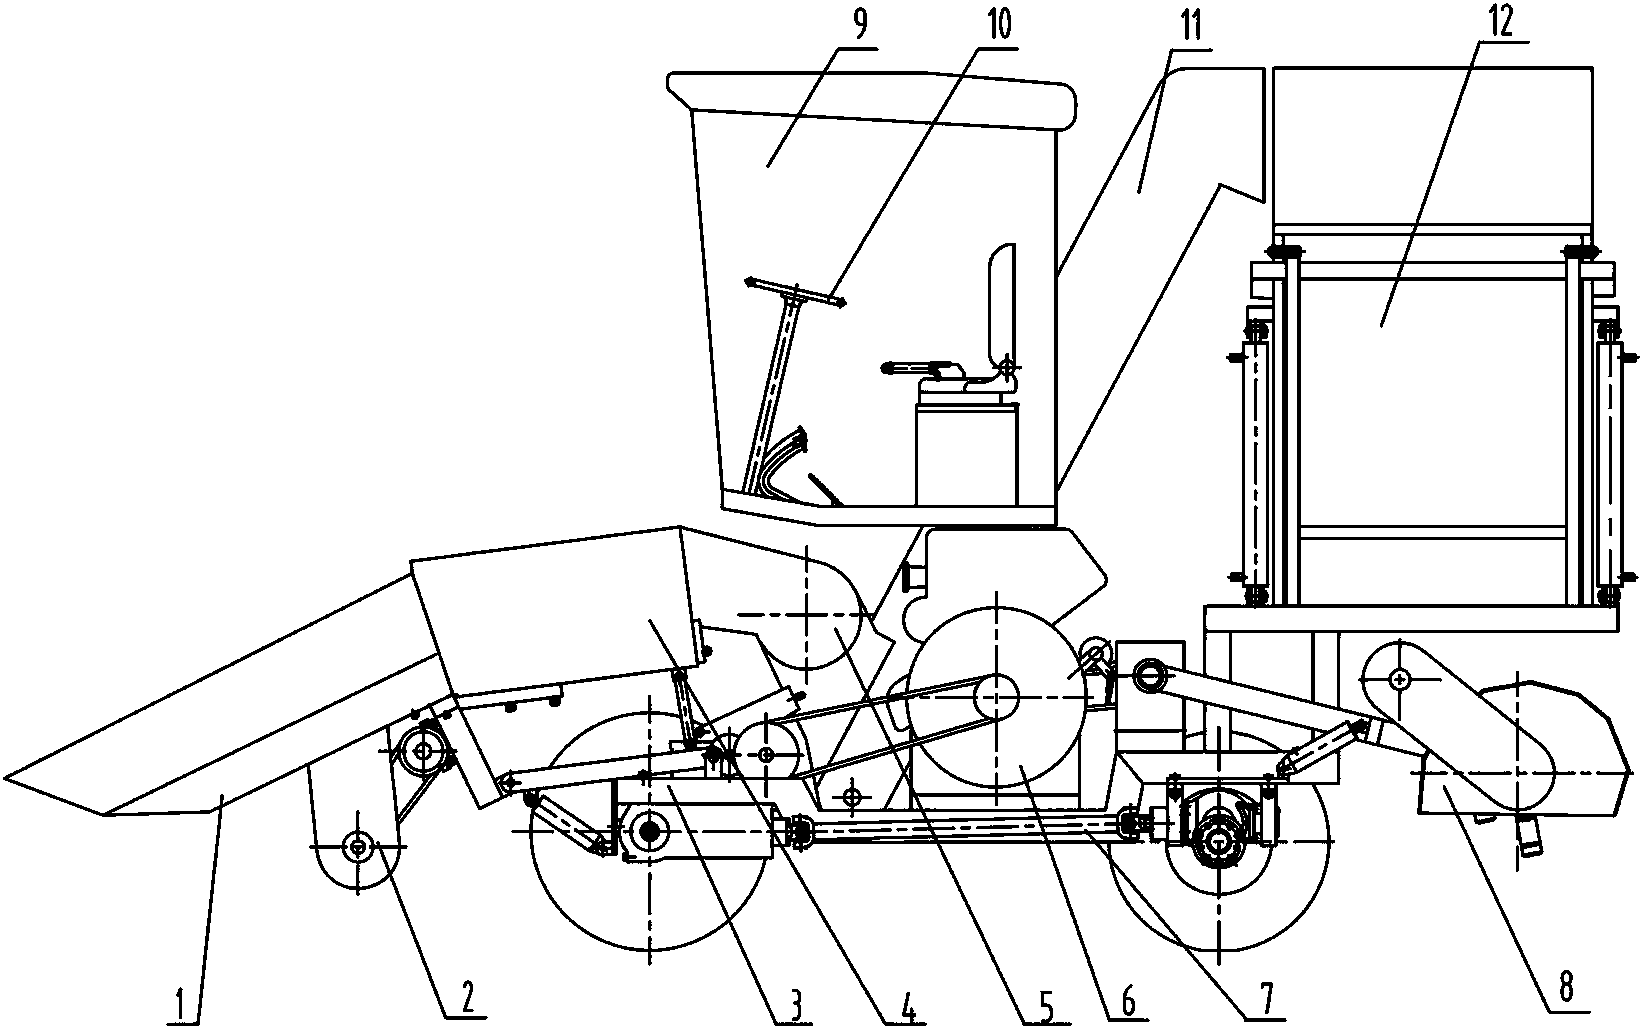 Four-wheel-driven three-row corn harvester with front husking machine